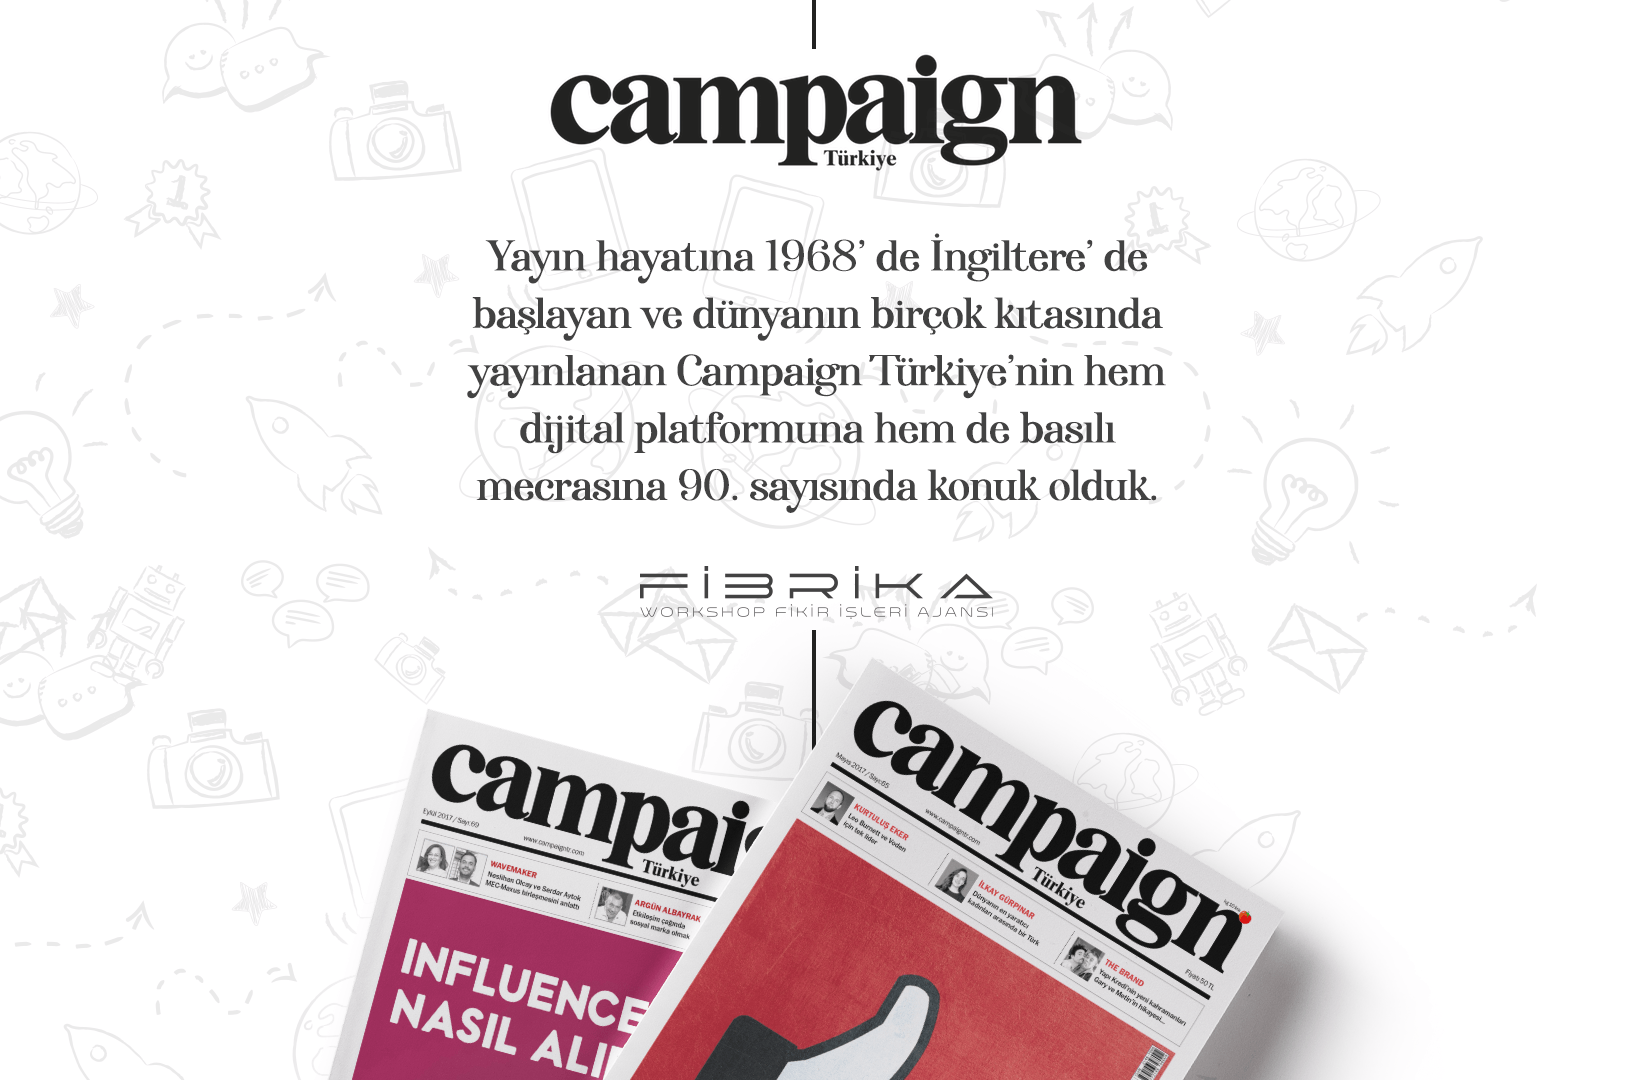 Campaing